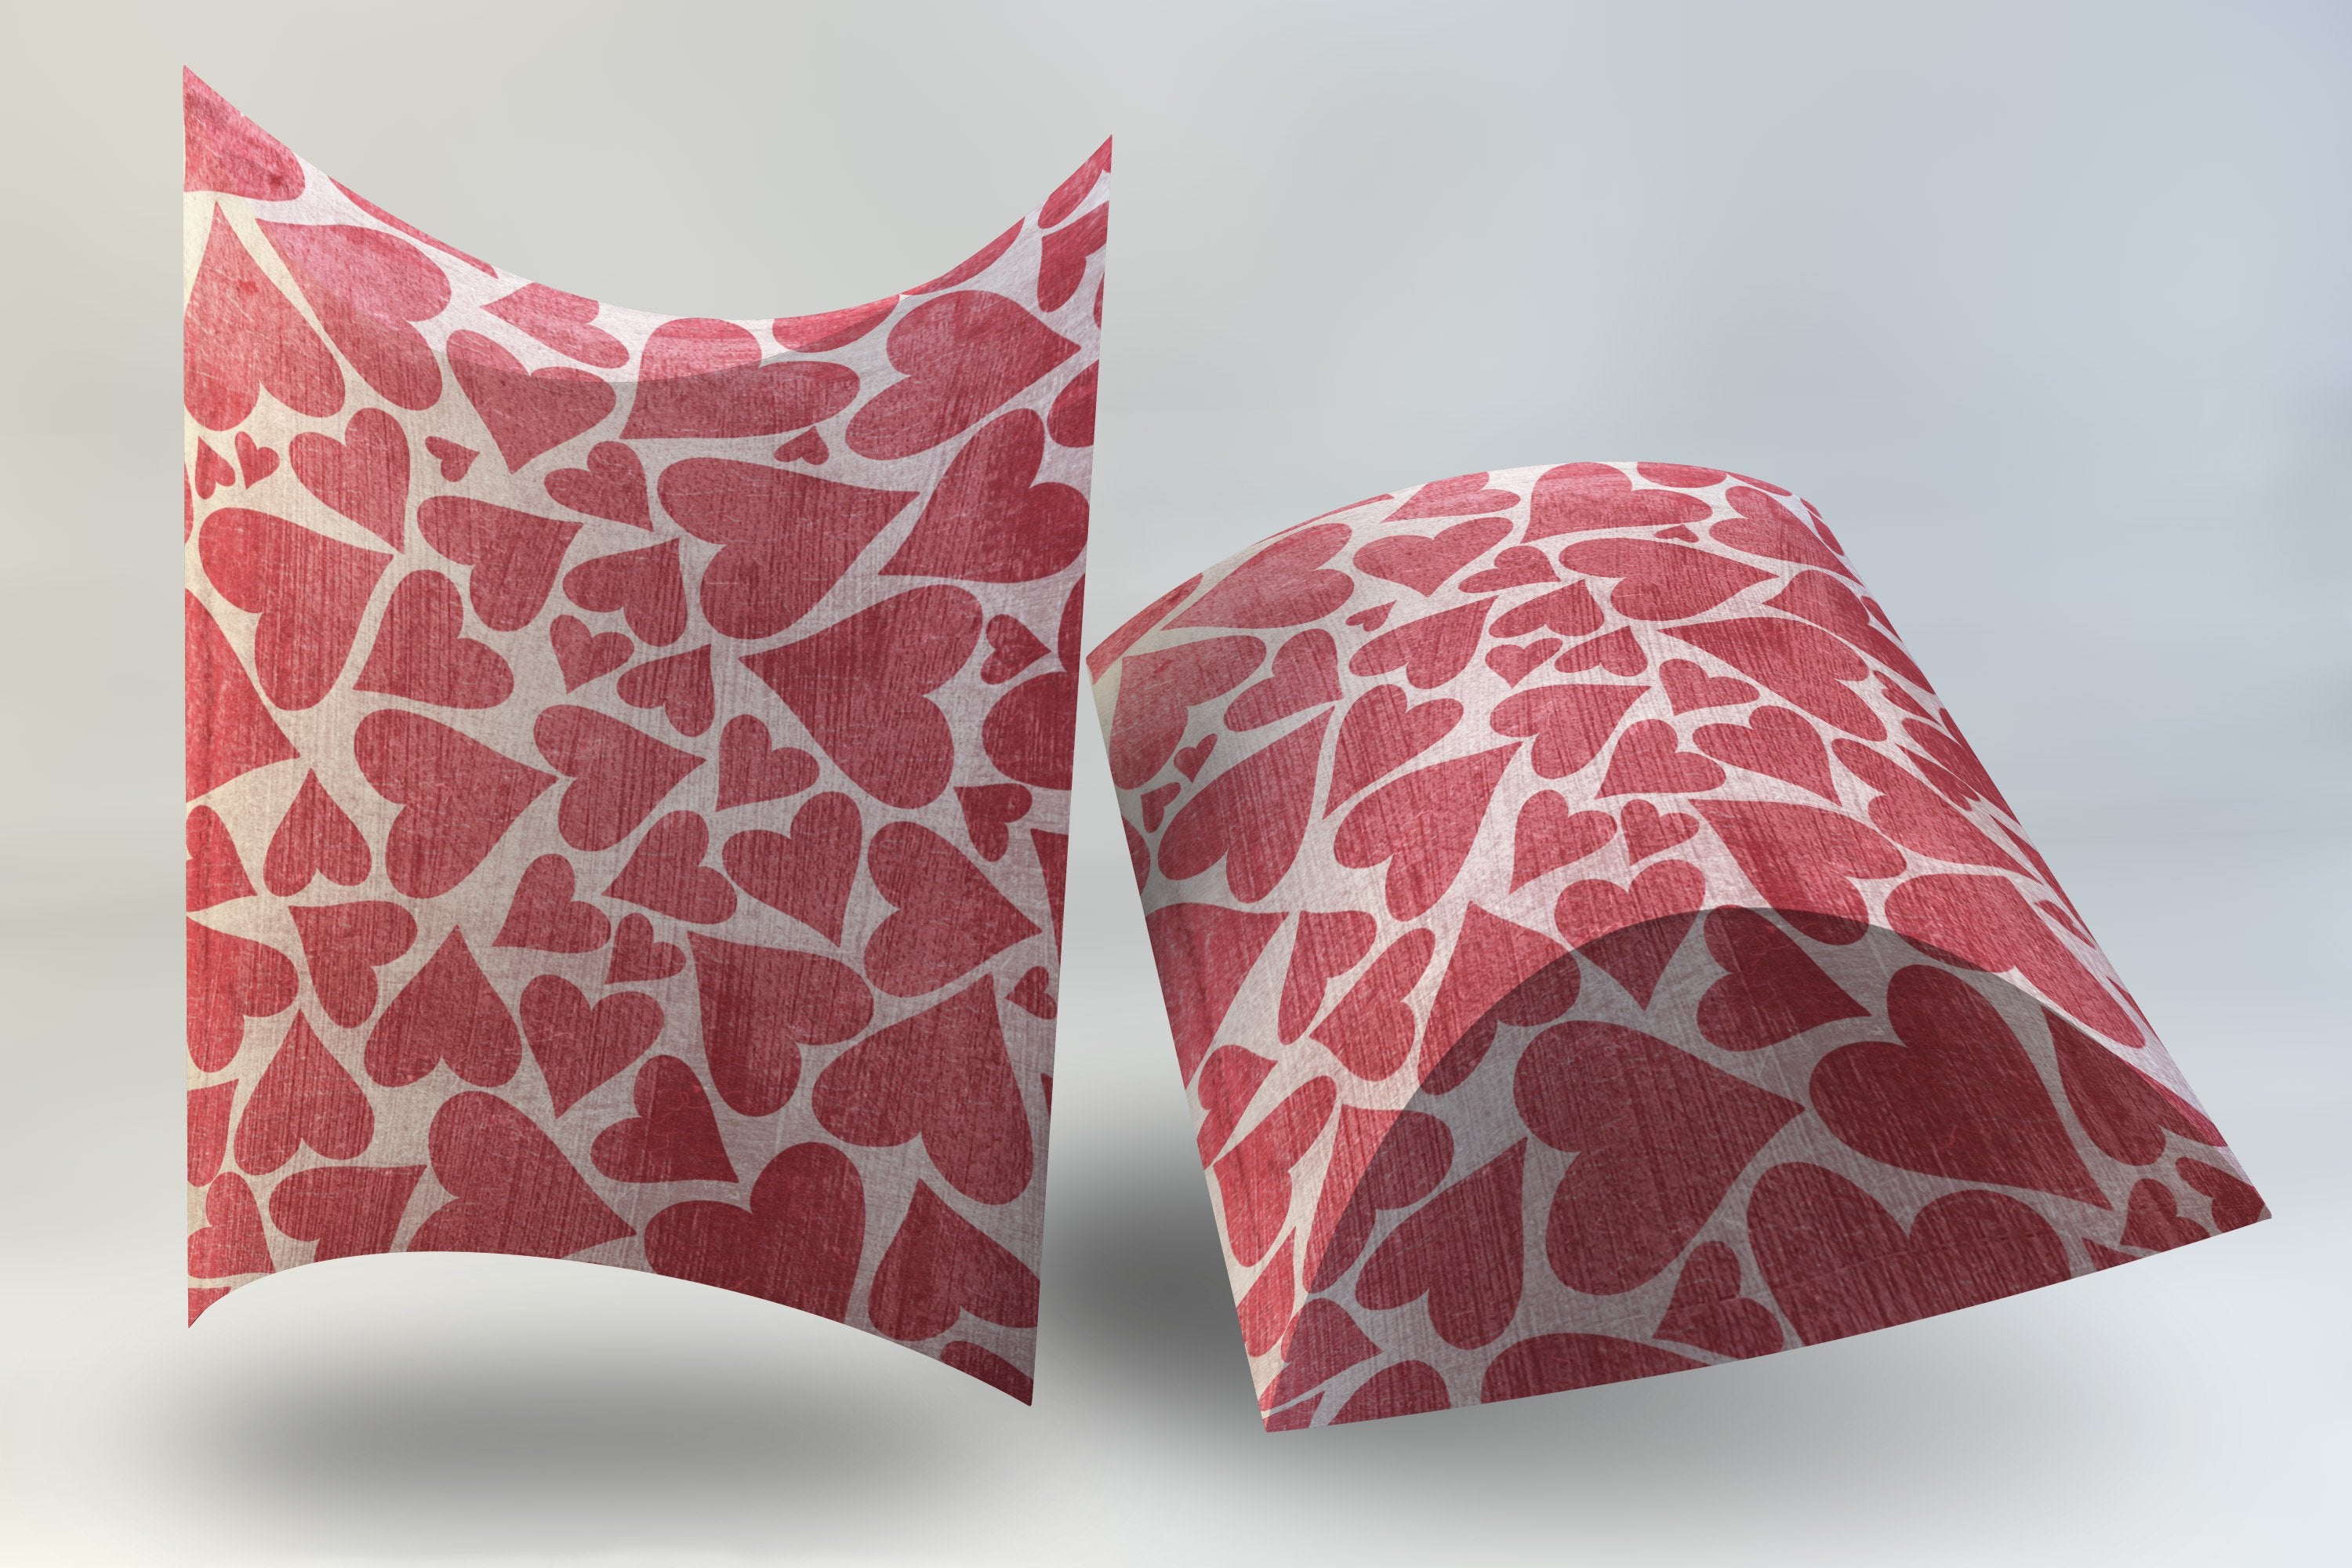 Digital Deep Pillow Box Pink and Red Hearts